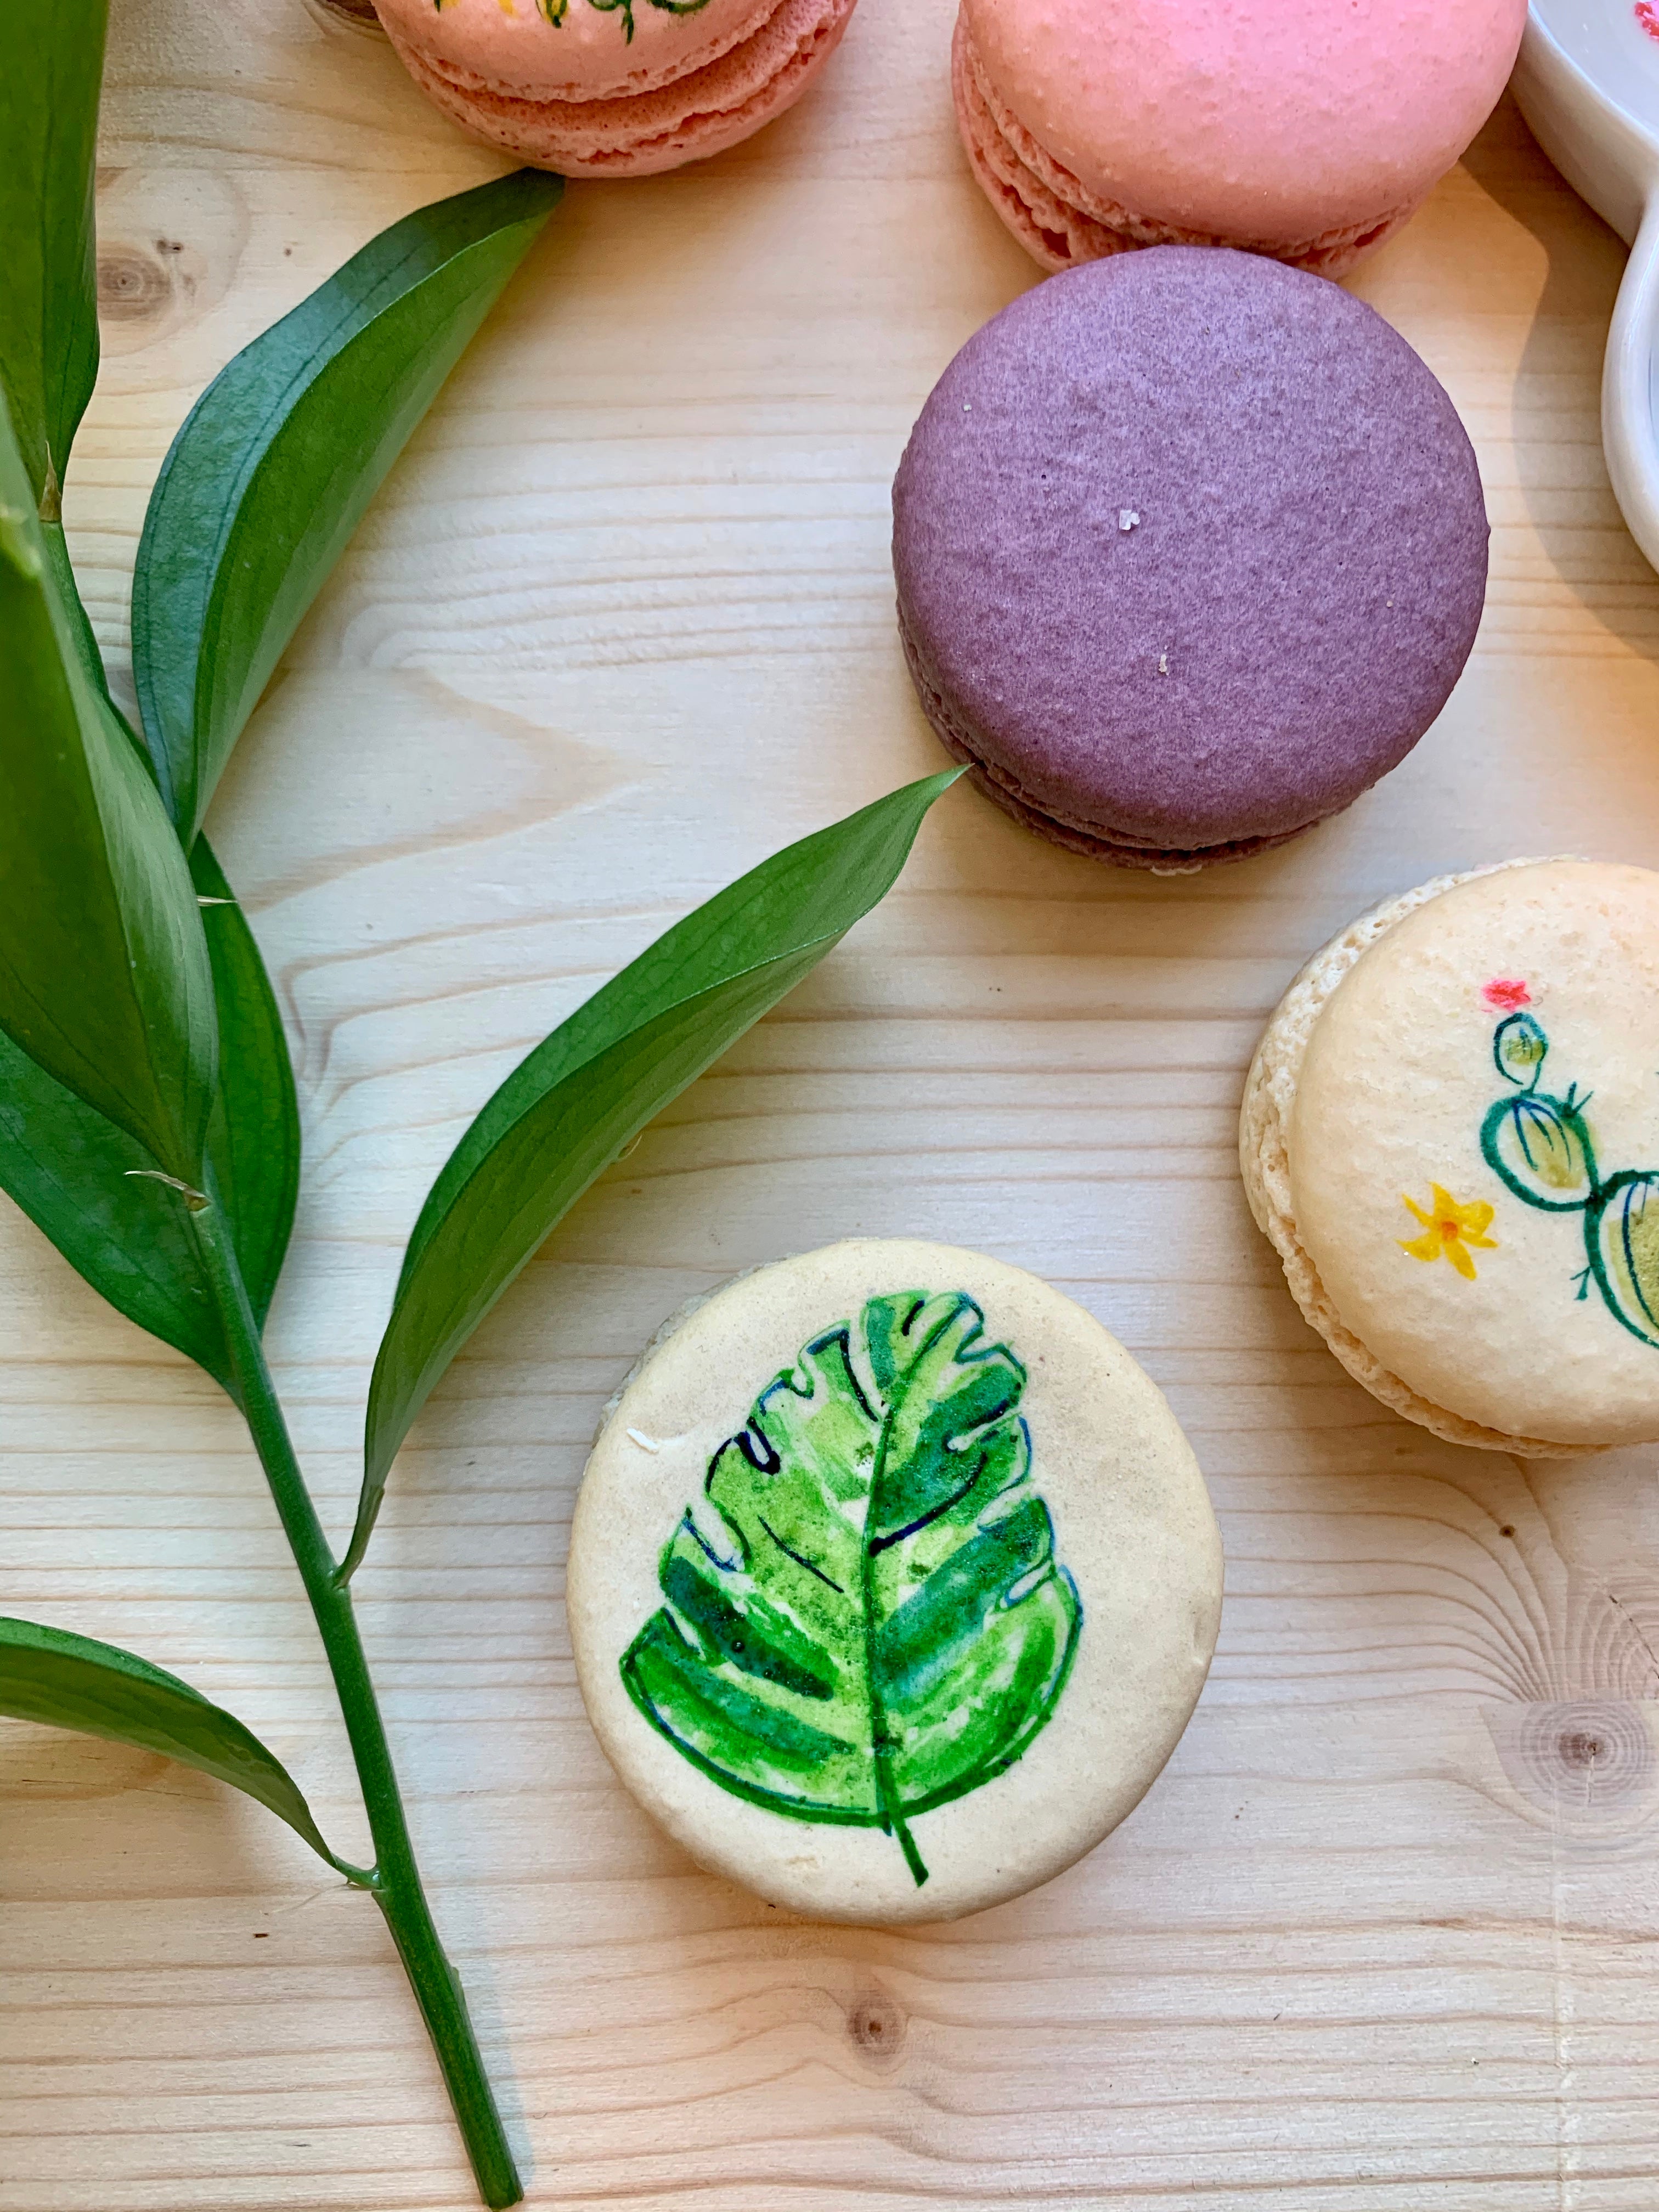 Private Macaron Painting Workshop - June 11th at 11am